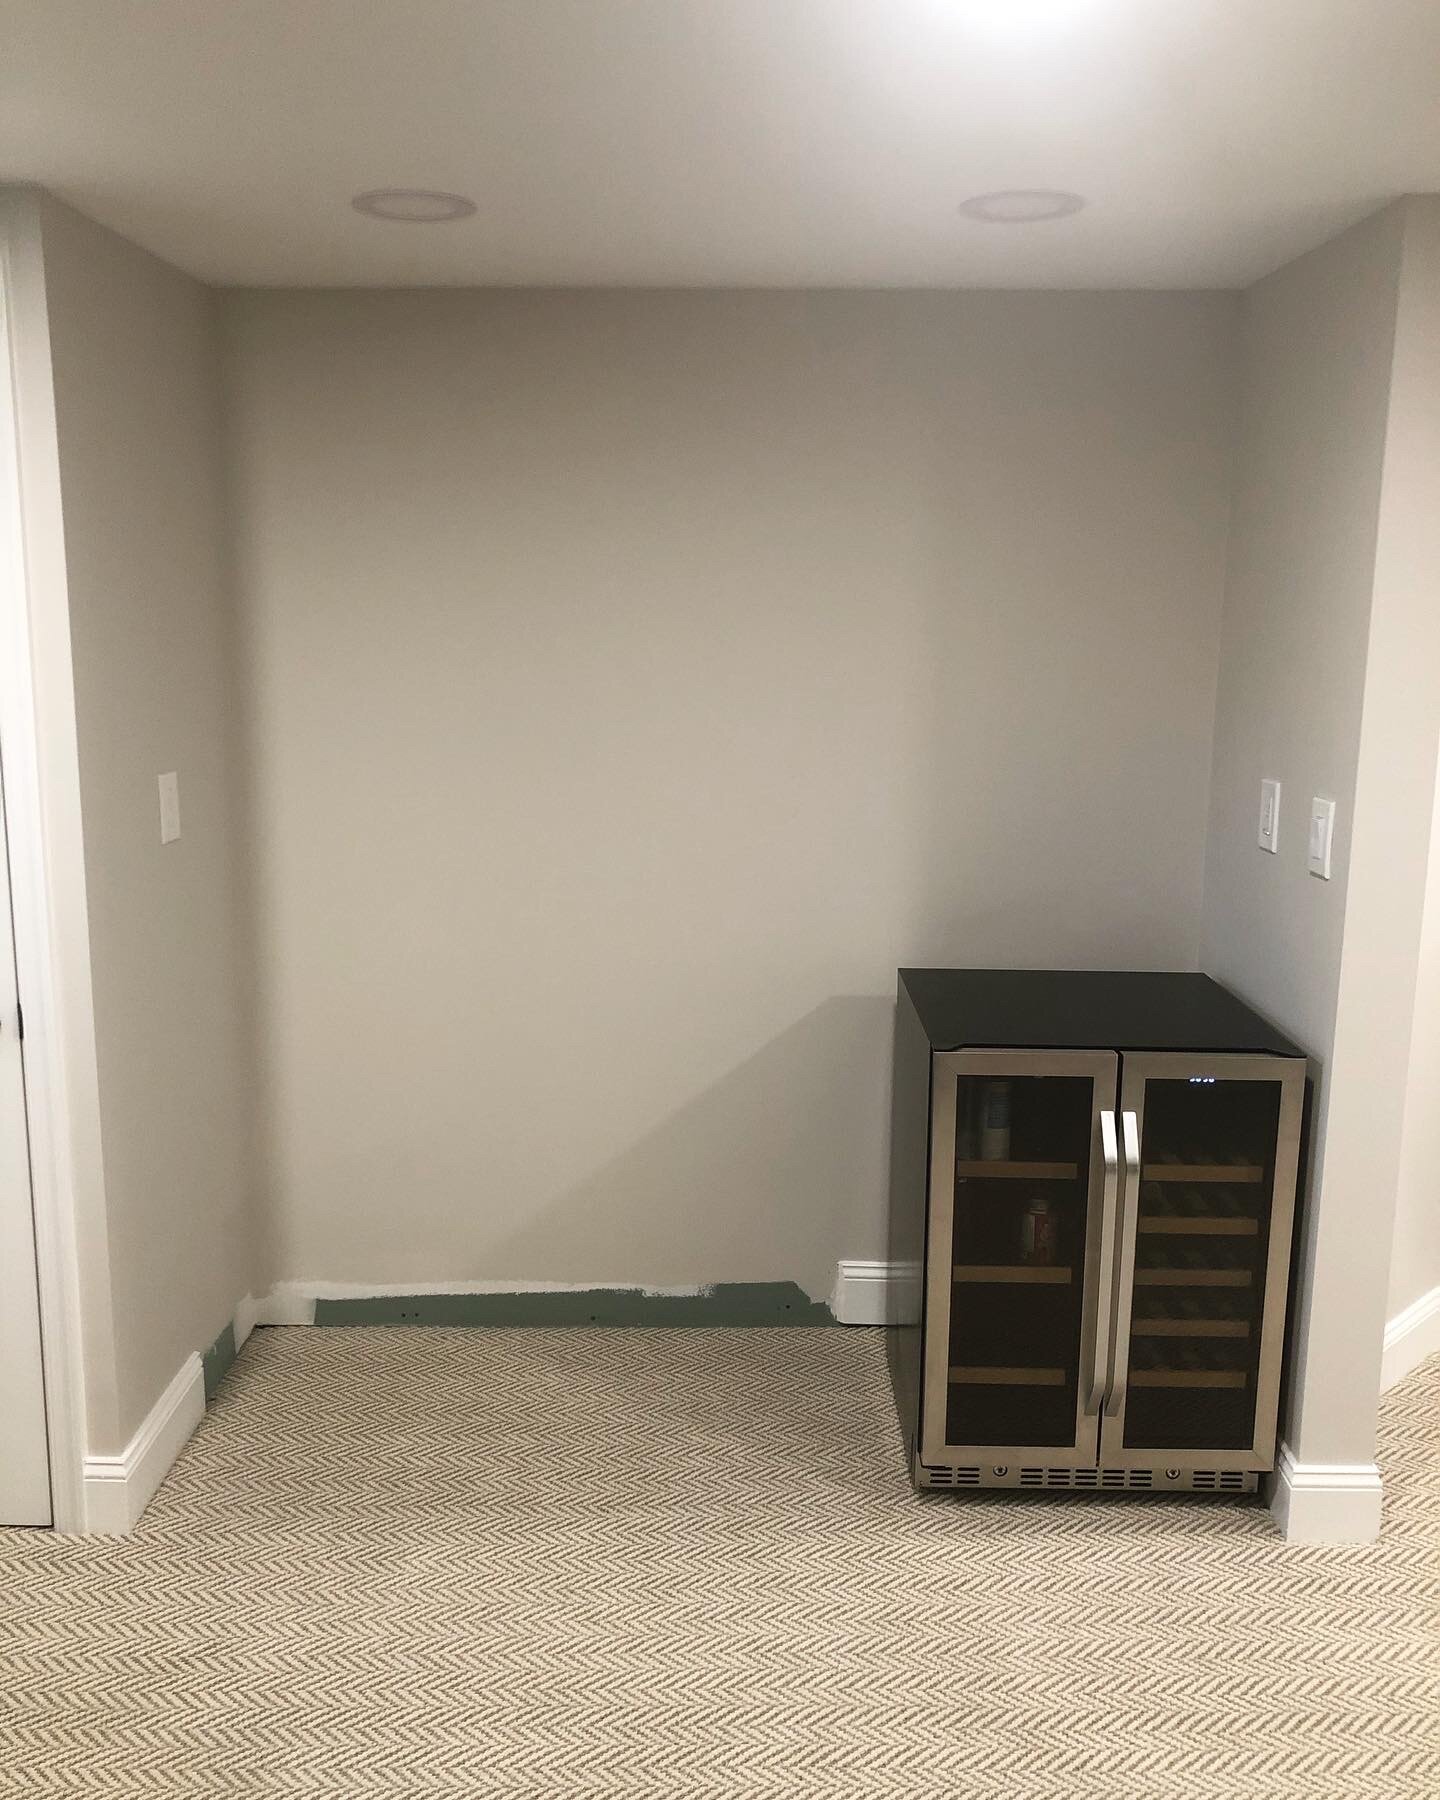  A client asked me to create a built-in bar for this alcove in their basement. They had an existing wine fridge they wanted to incorporate into the design as well.   